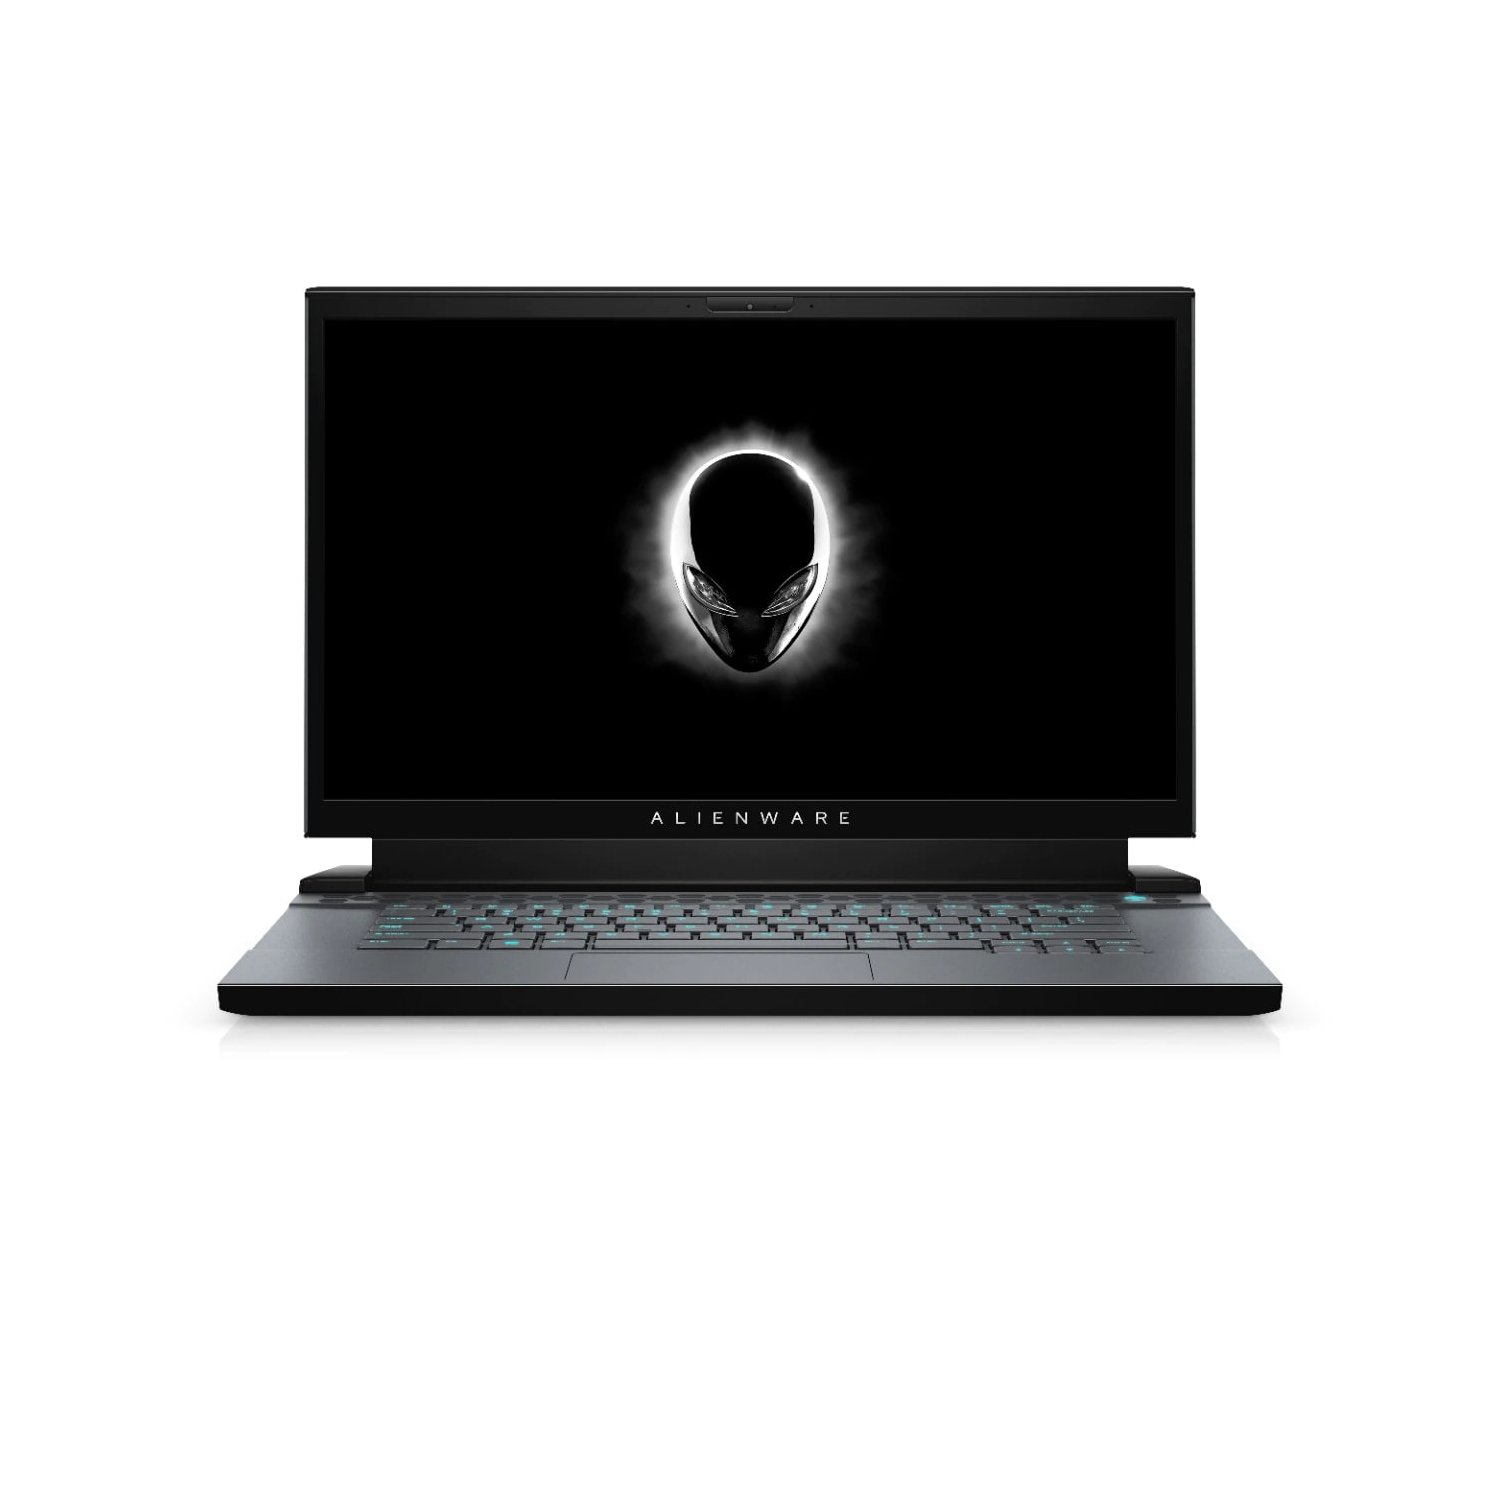 Refurbished (Excellent) - Dell Alienware m15 R2 Gaming Laptop (2019), 15.6" FHD, Core i7, 512GB SSD + 512GB SSD, 8GB RAM, RTX 2070, 6 Cores @ 4.5 GHz Certified